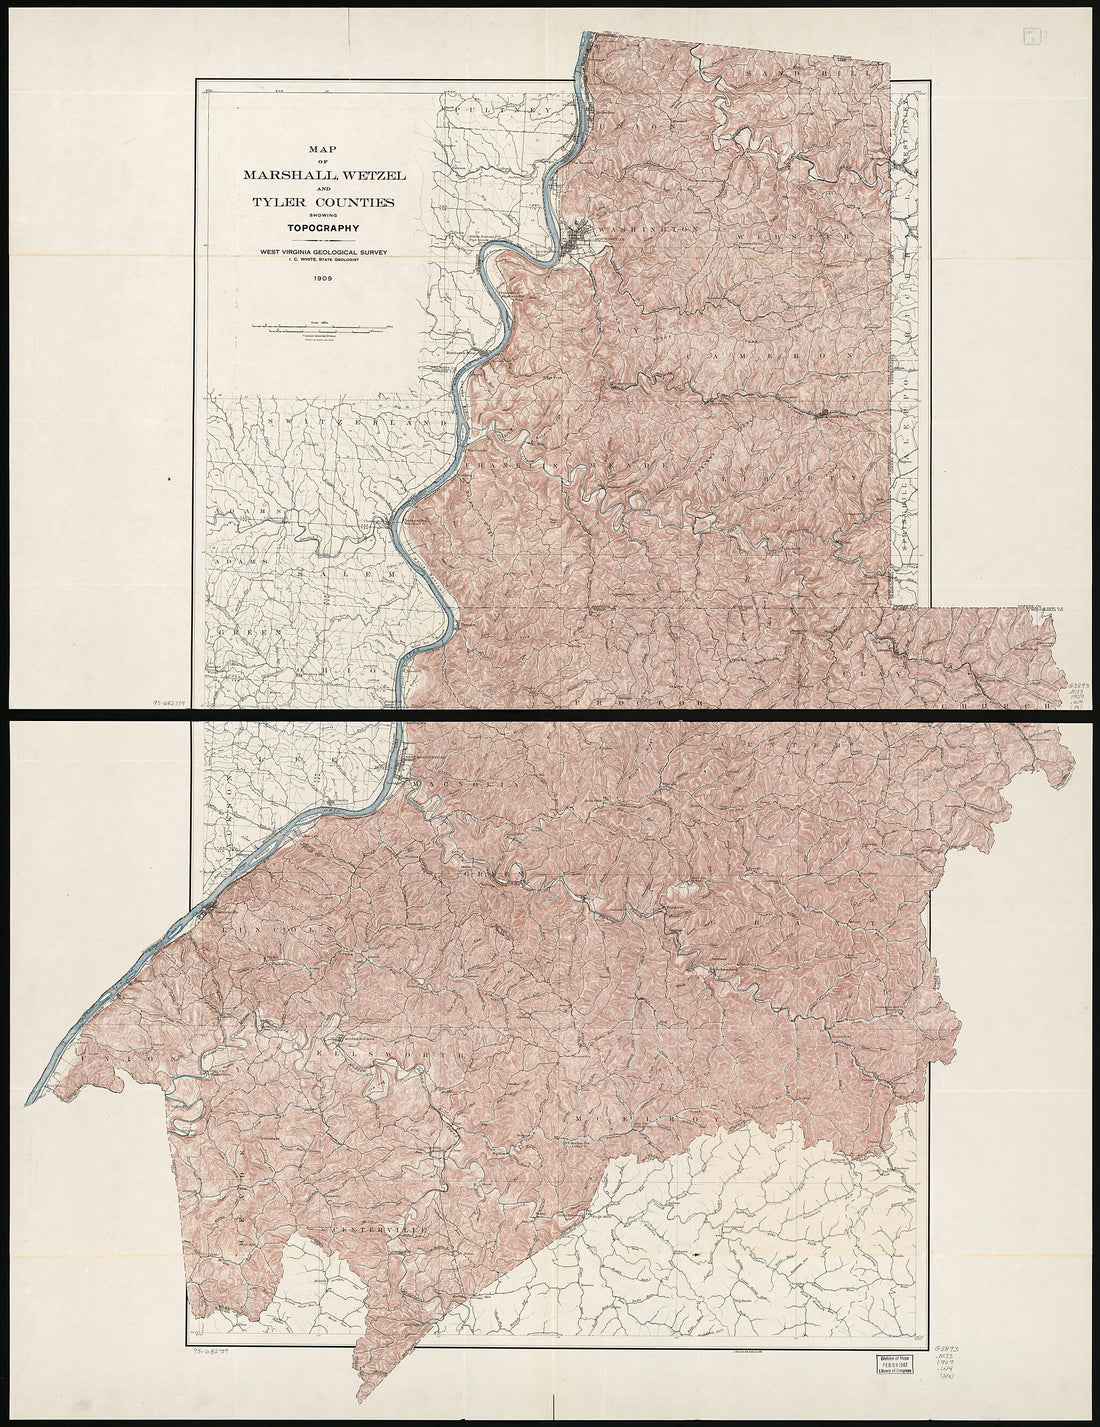 This old map of Map of Marshall, Wetzel, and Tyler Counties Showing Topography from 1909 was created by  West Virginia Geological and Economic Survey, I. C. (Israel Charles) White in 1909